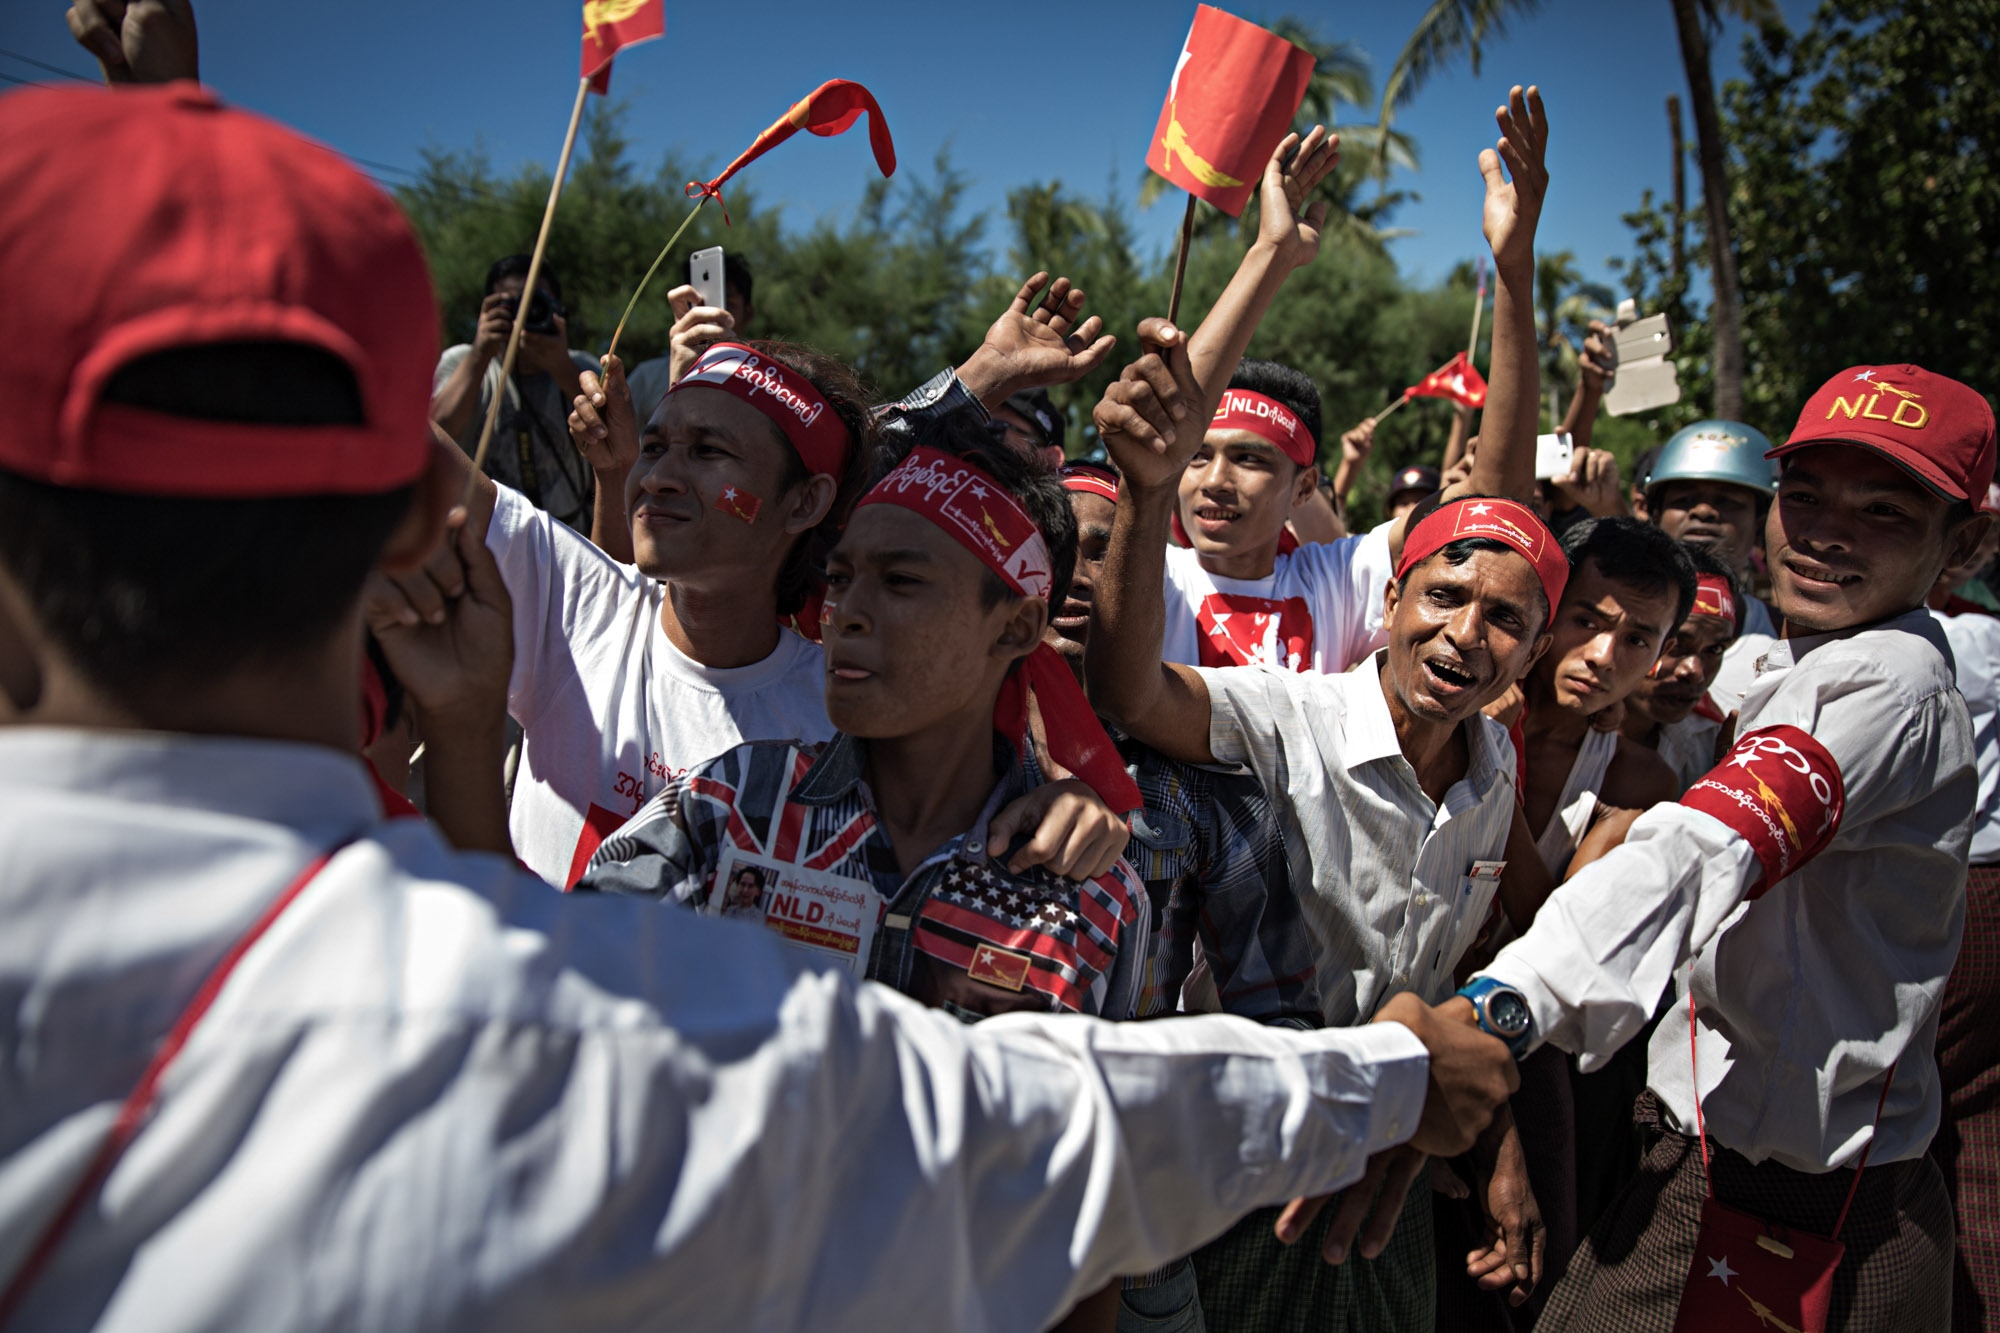 NLD (National League for Democracy) supporters at a rally near Hinthaday, Myanmar, November 2015.